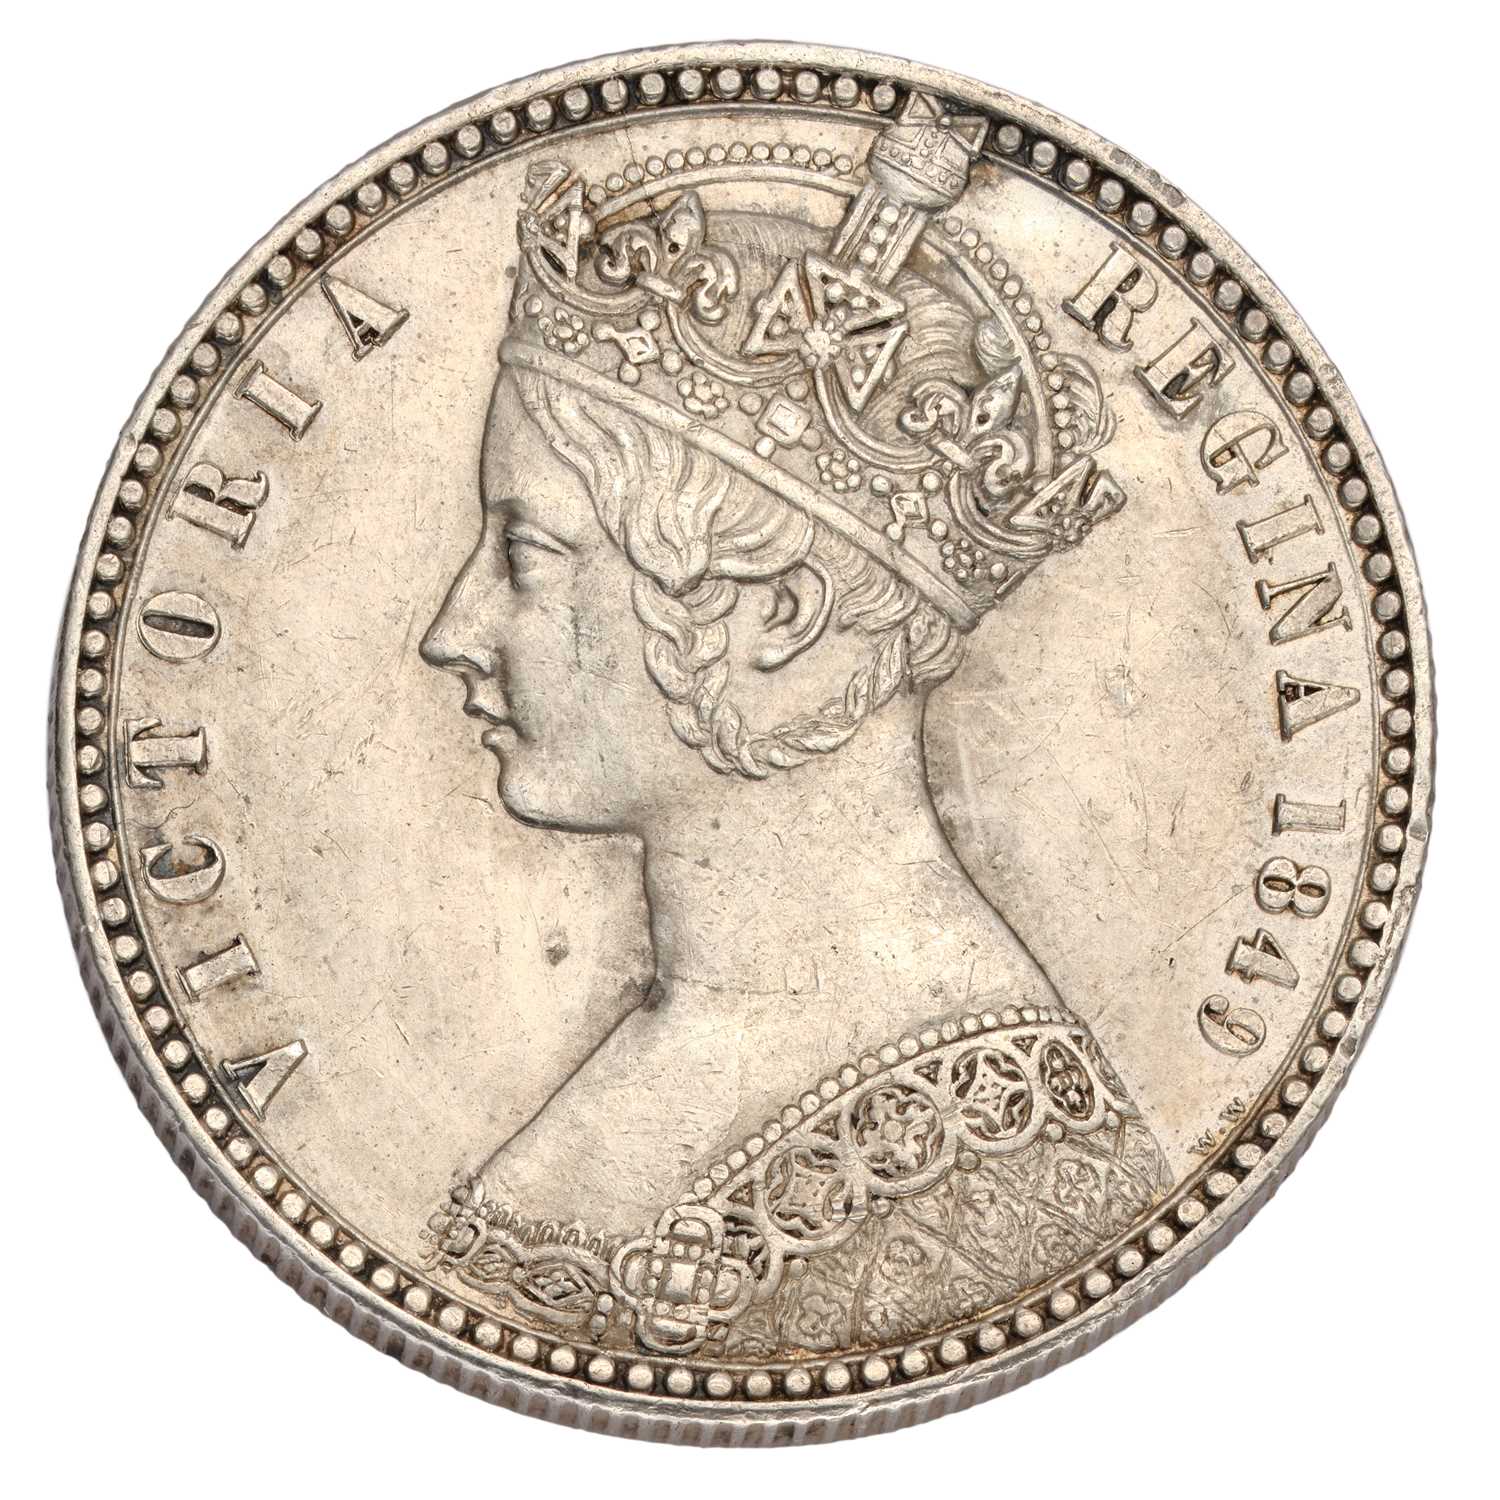 Victoria, 'Godless' Florin 1849 (Bull 2815, ESC 802, S.3890) evidence of cleaning o/wise about